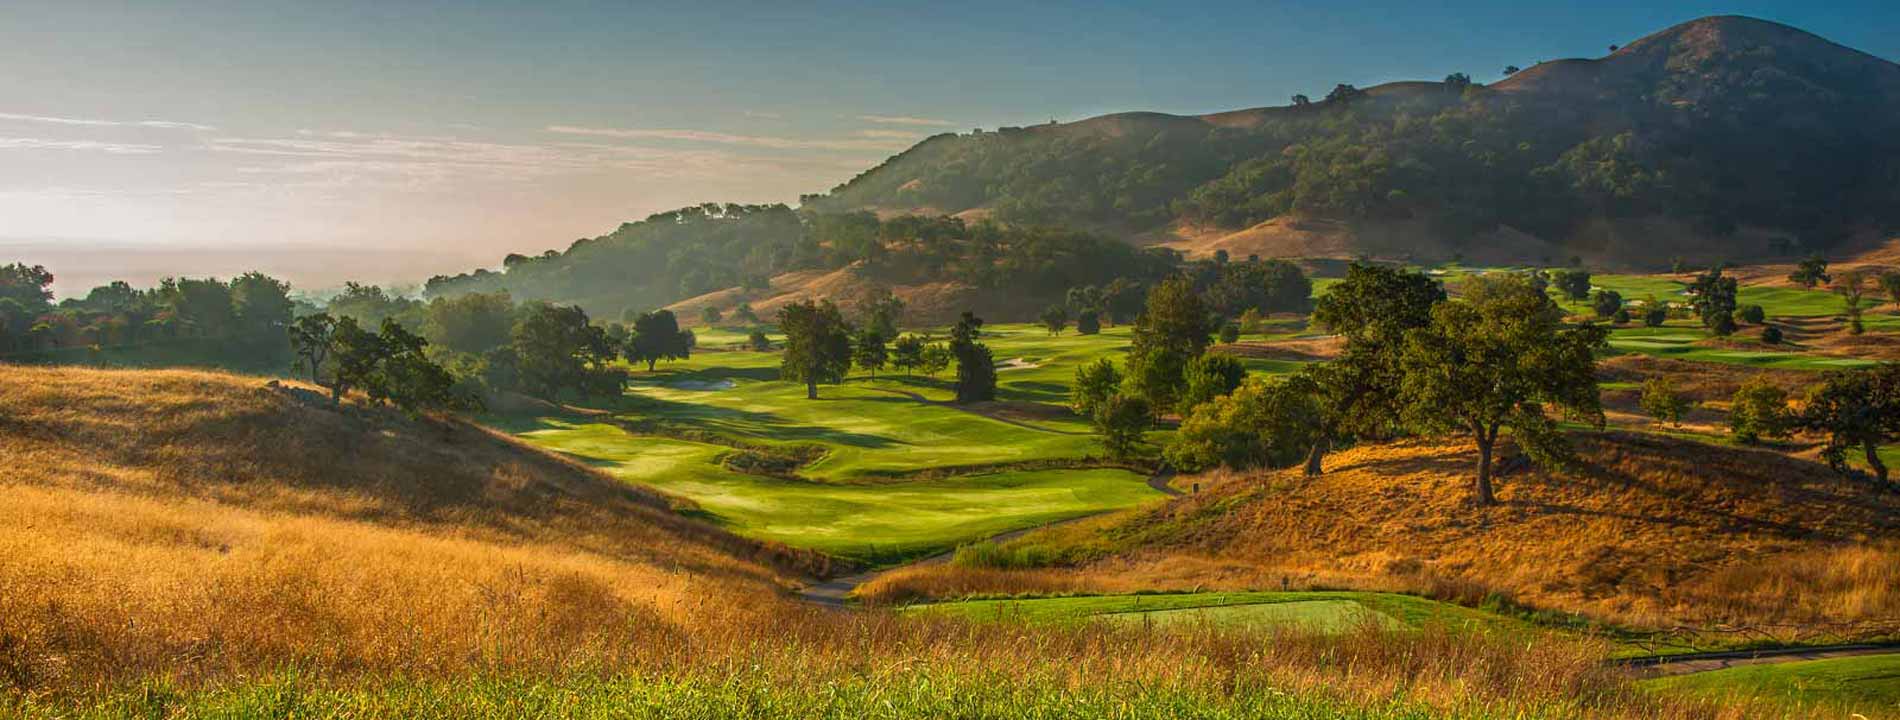 Rosewood CordeValle's golf course has hosted multiple professional tournaments.